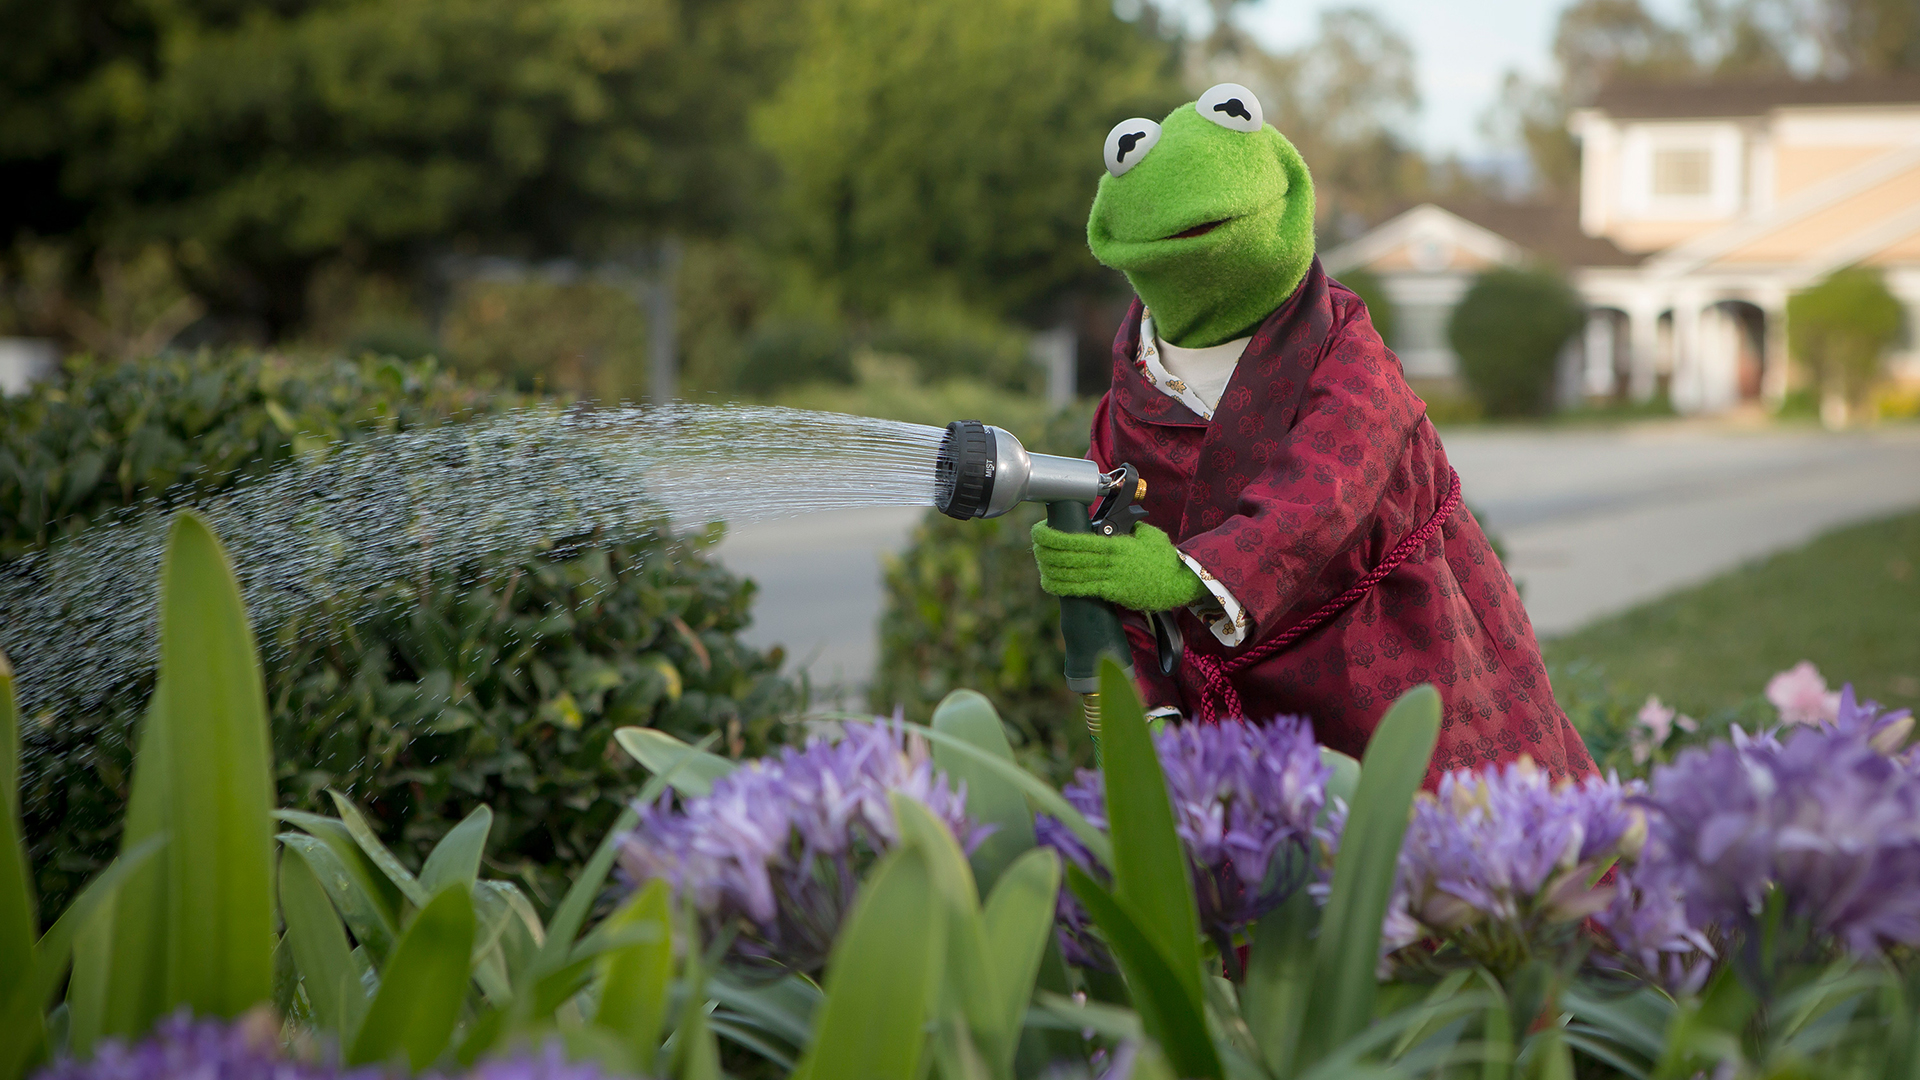 Kermit The Frog Flowers Sesame Street The Muppets 1920x1080